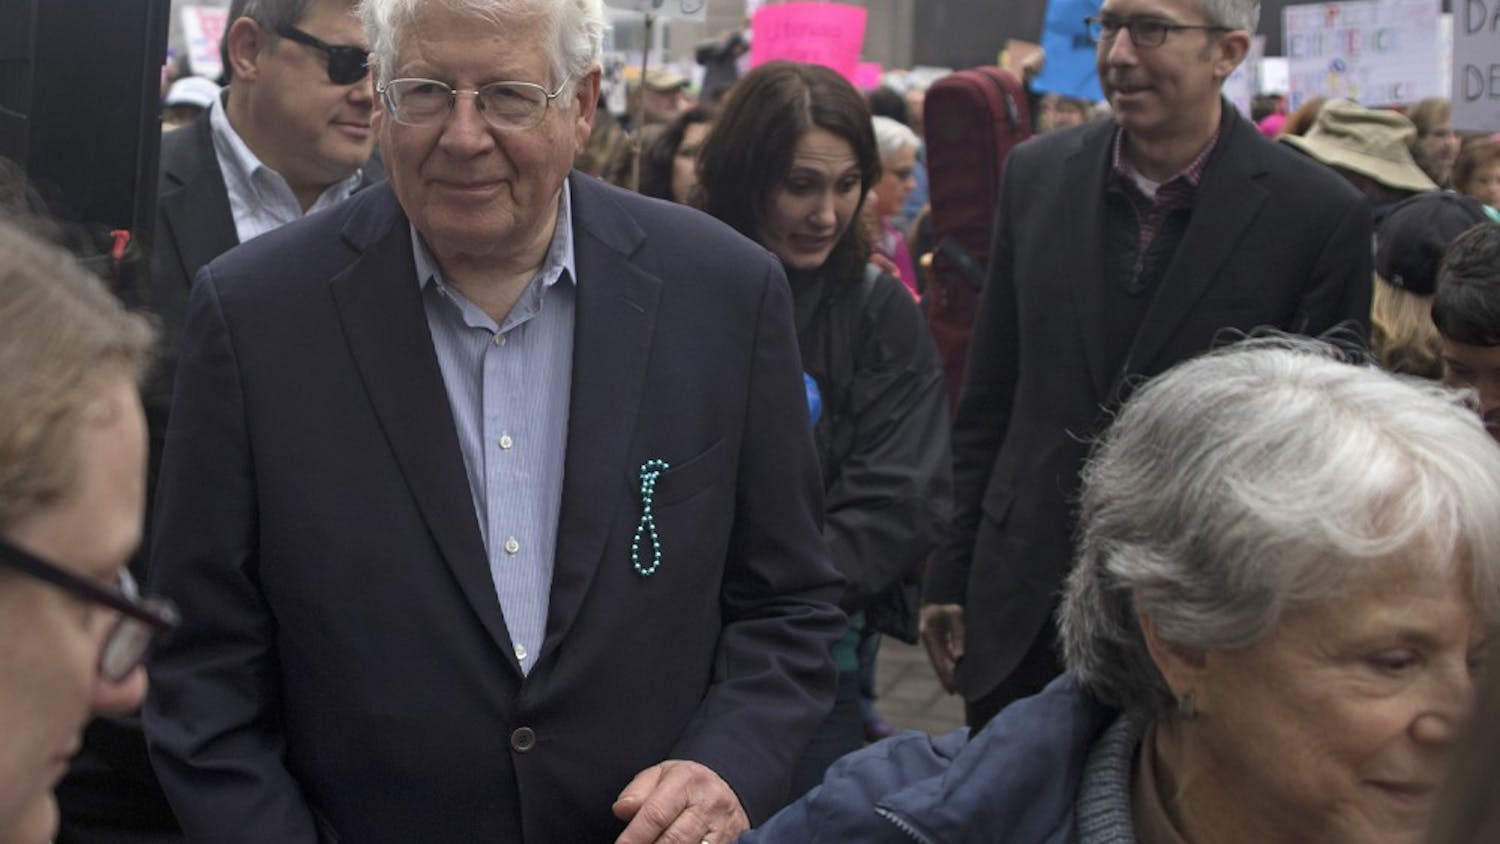 North Carolina Congressman David Price marches with protestors as they make their way through Raleigh during the 2016 Women's March in protest of the inauguration of Donald Trump as the 45th president of the United States.